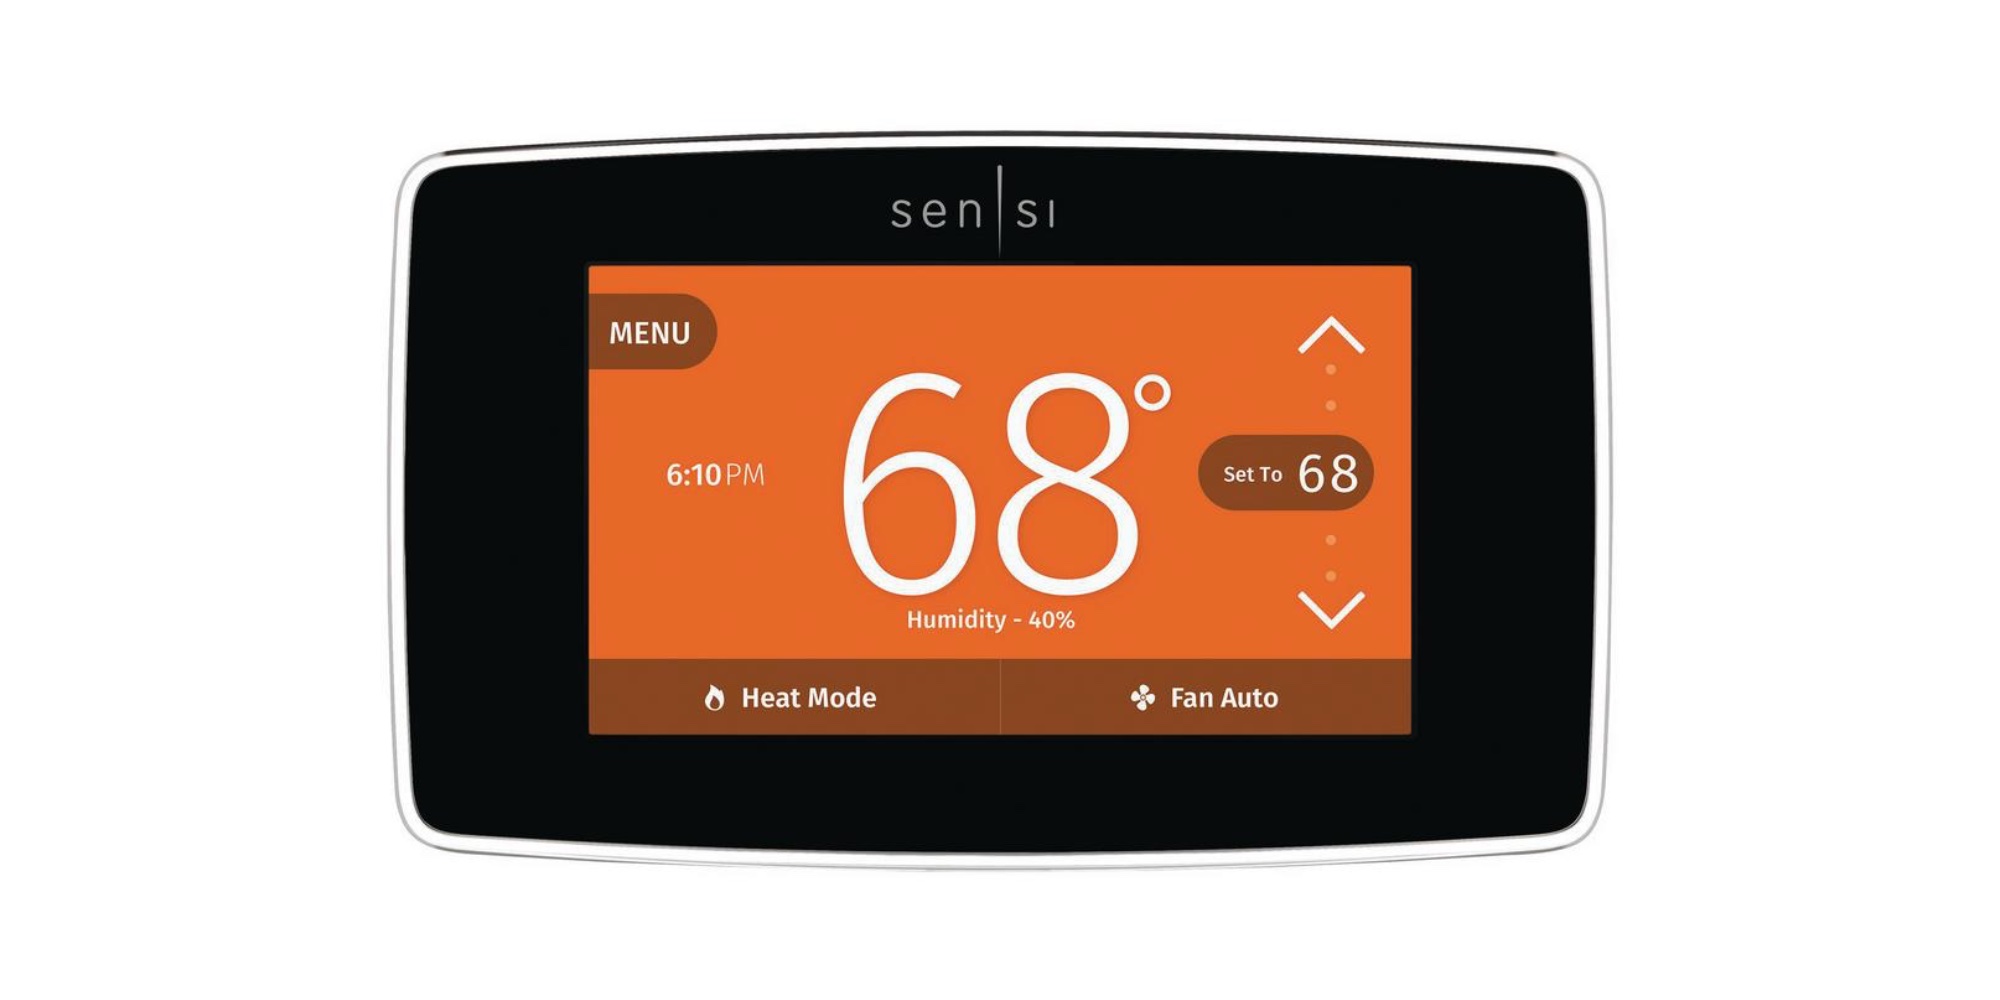 emerson-packs-homekit-into-its-sensi-touch-thermostat-at-116-50-save